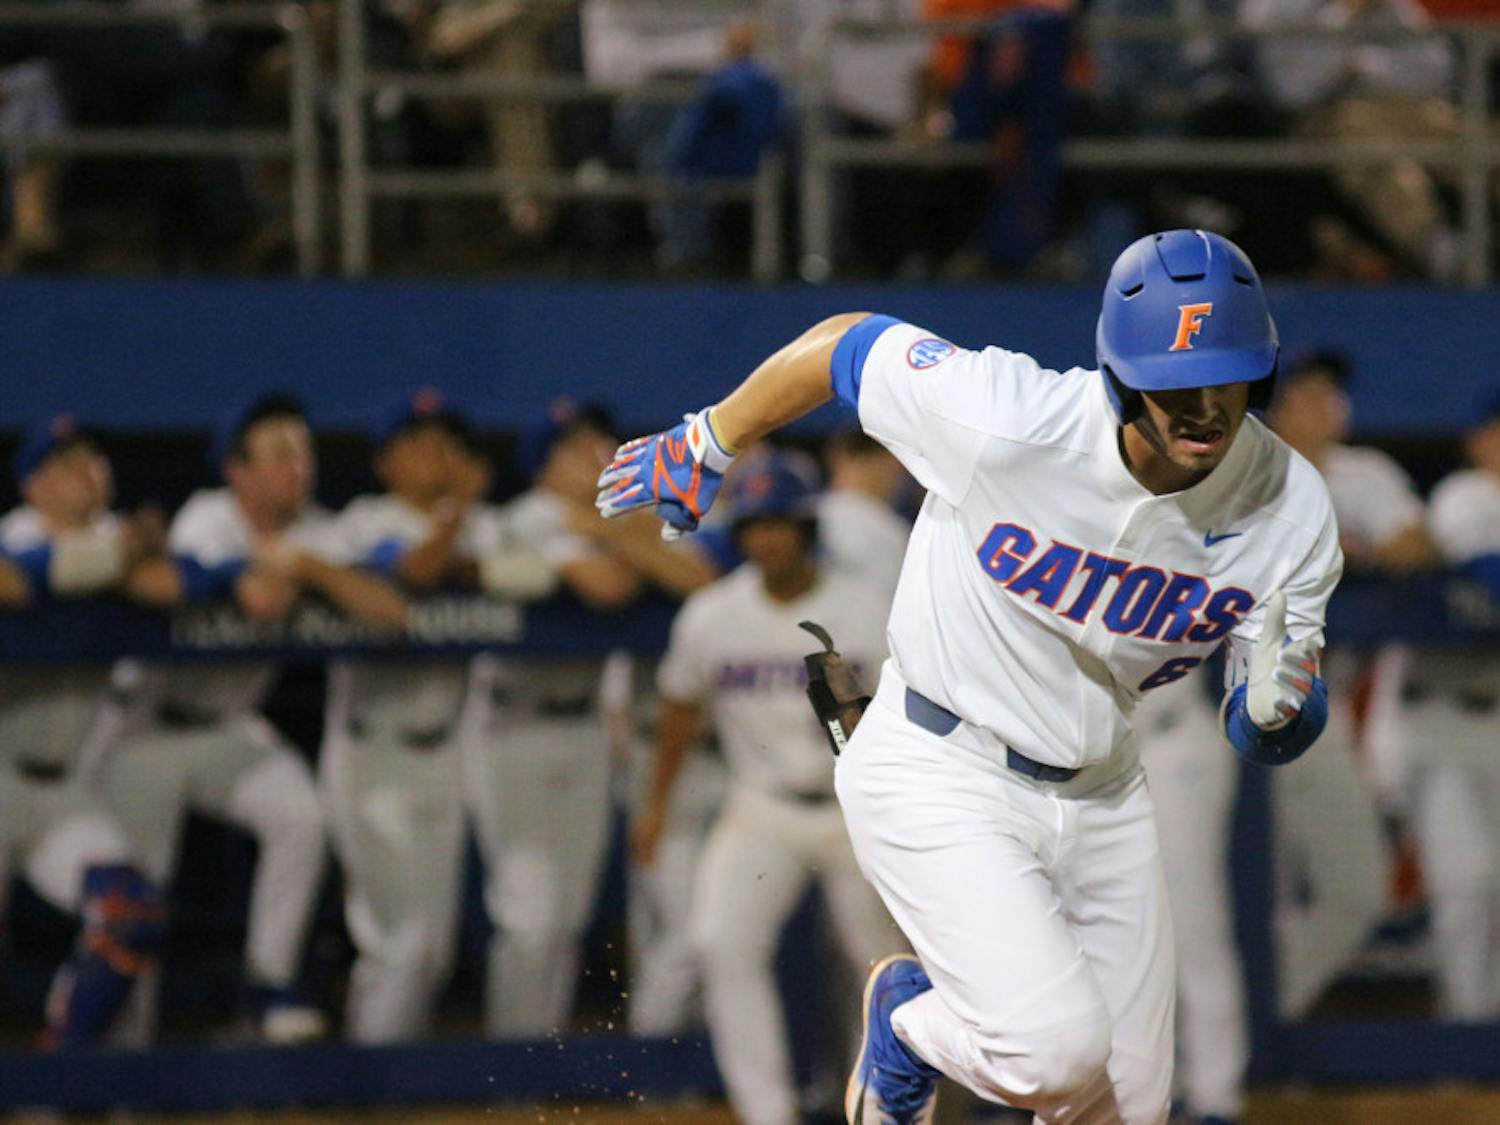 UF third baseman Jonathan India's solo home run jump-started the Gators' offense on a 3-2 win against Jacksonville at the Gainesville Regional. His solo home run was one of three for Florida on the night. 